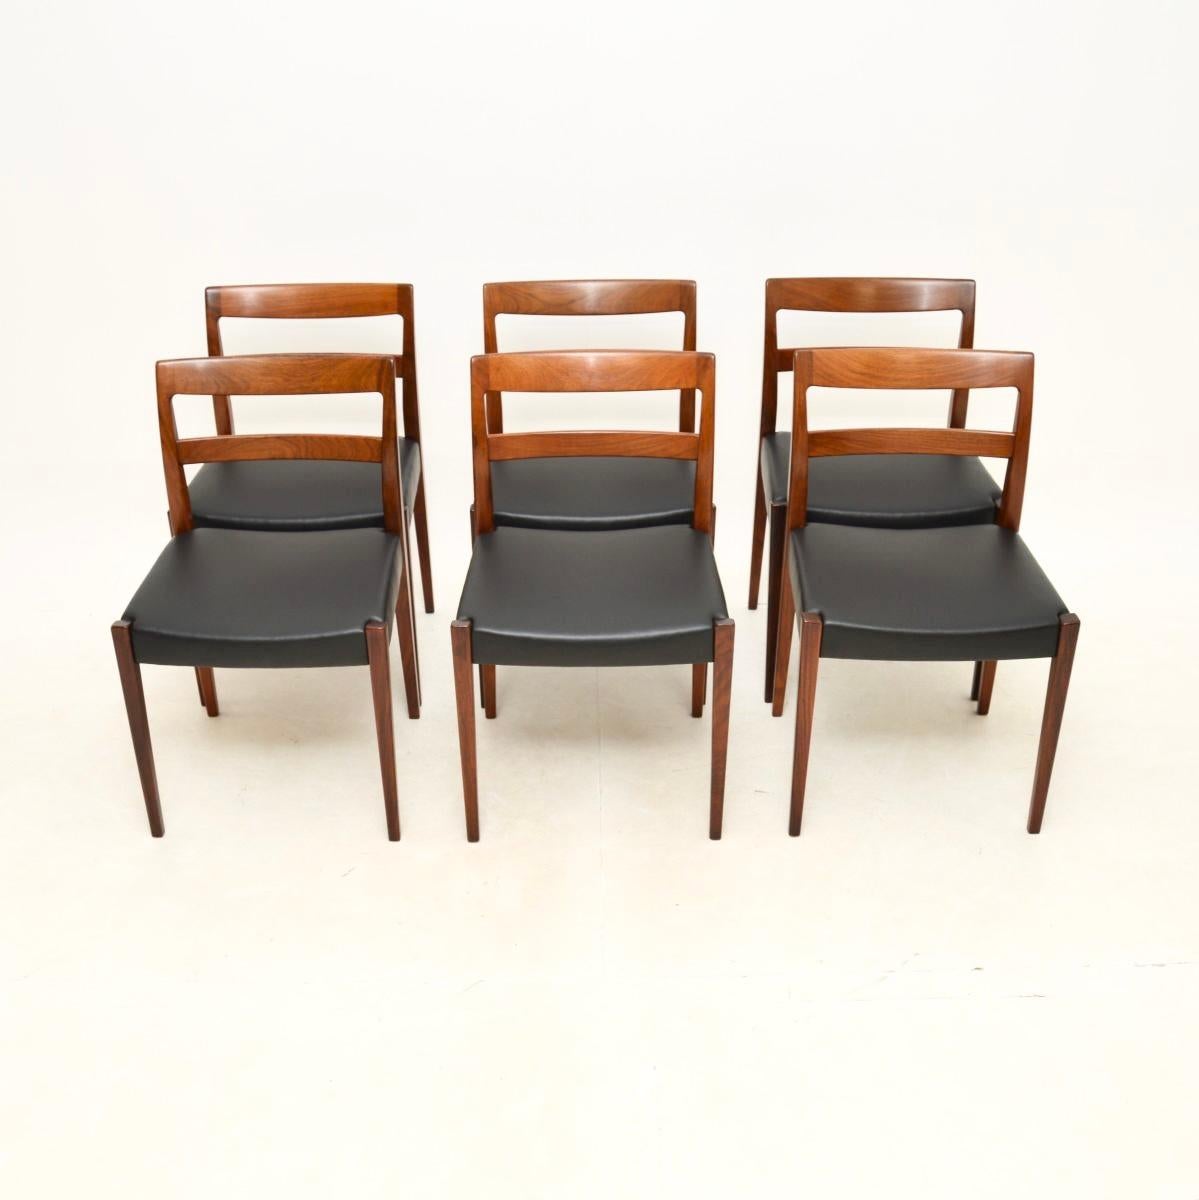 A fantastic set of six vintage dining chairs by Nils Jonsson. They were made in Sweden, they date from the 1960’s.

The quality is outstanding, the frames are finely sculpted, sturdy and well built. The has a gorgeous colour tone and lovely grain